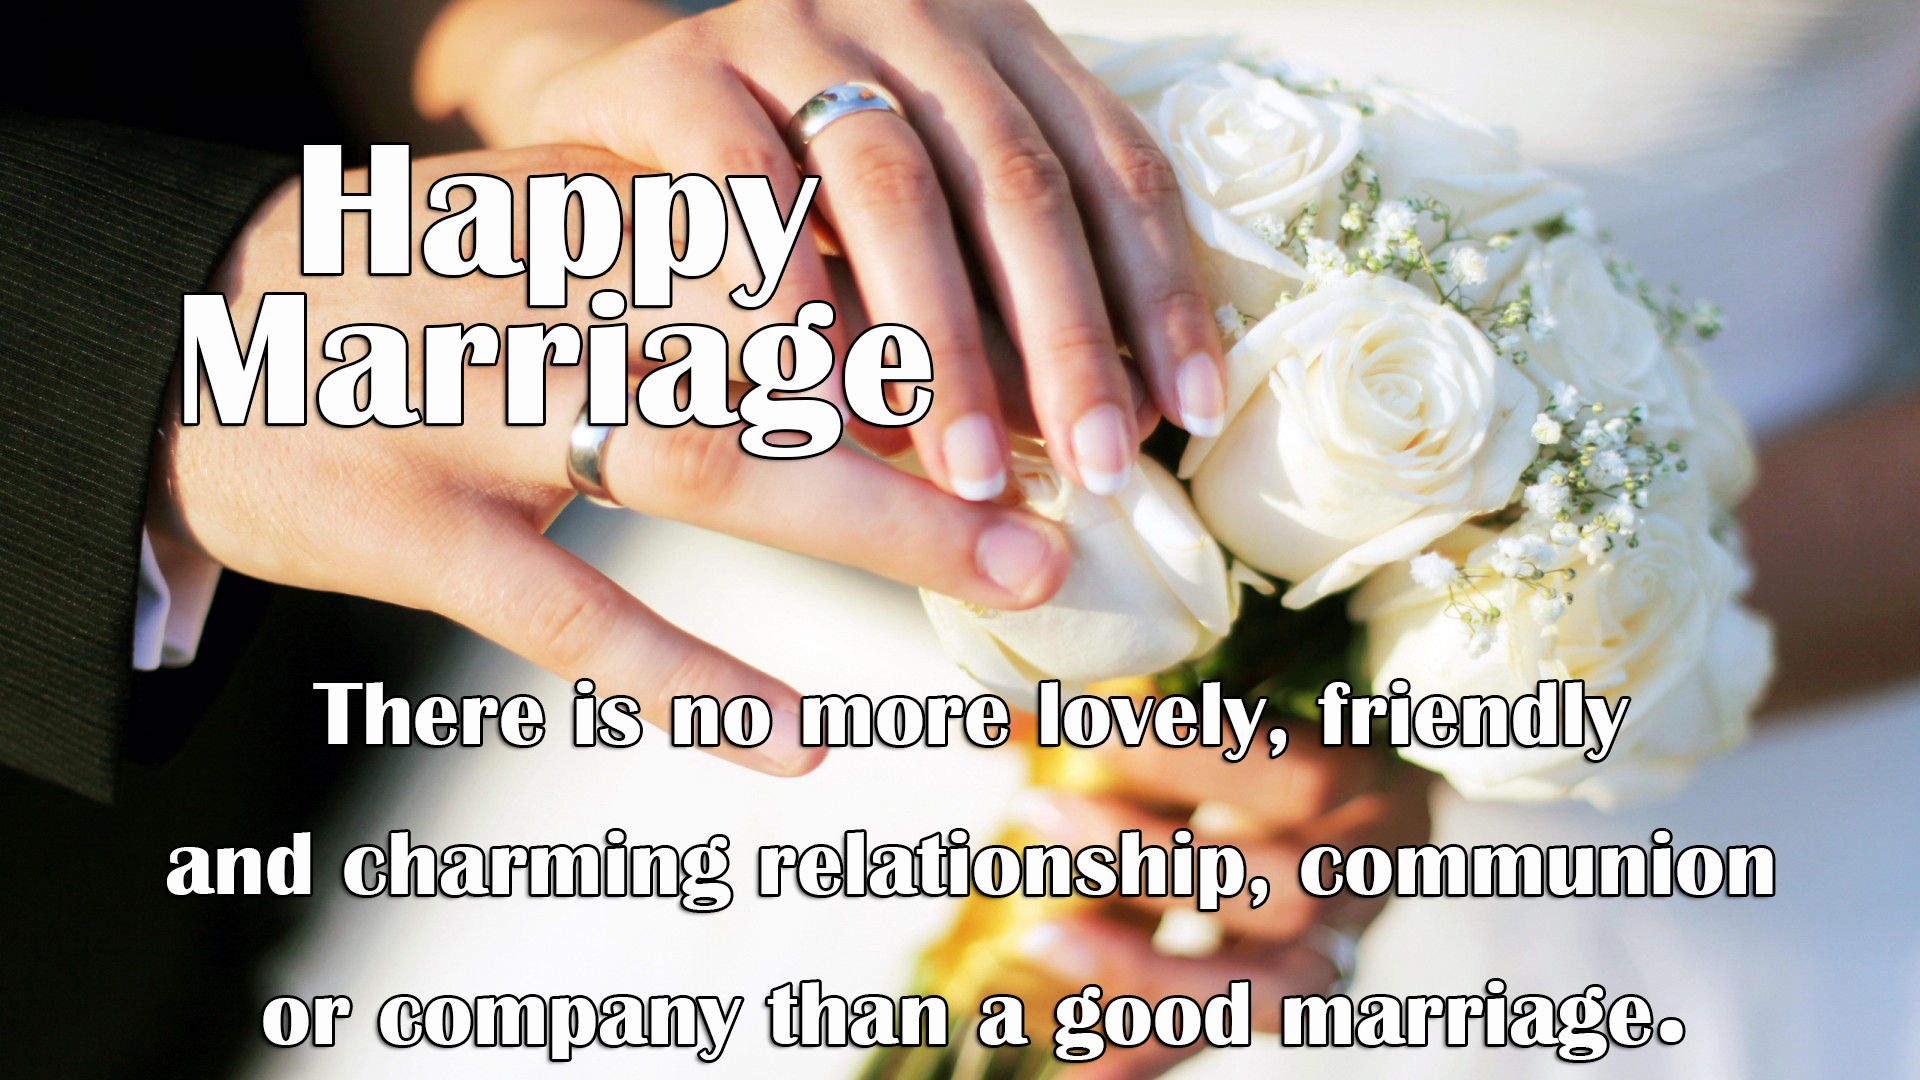 marriage-wishes-background-pictures-carrotapp